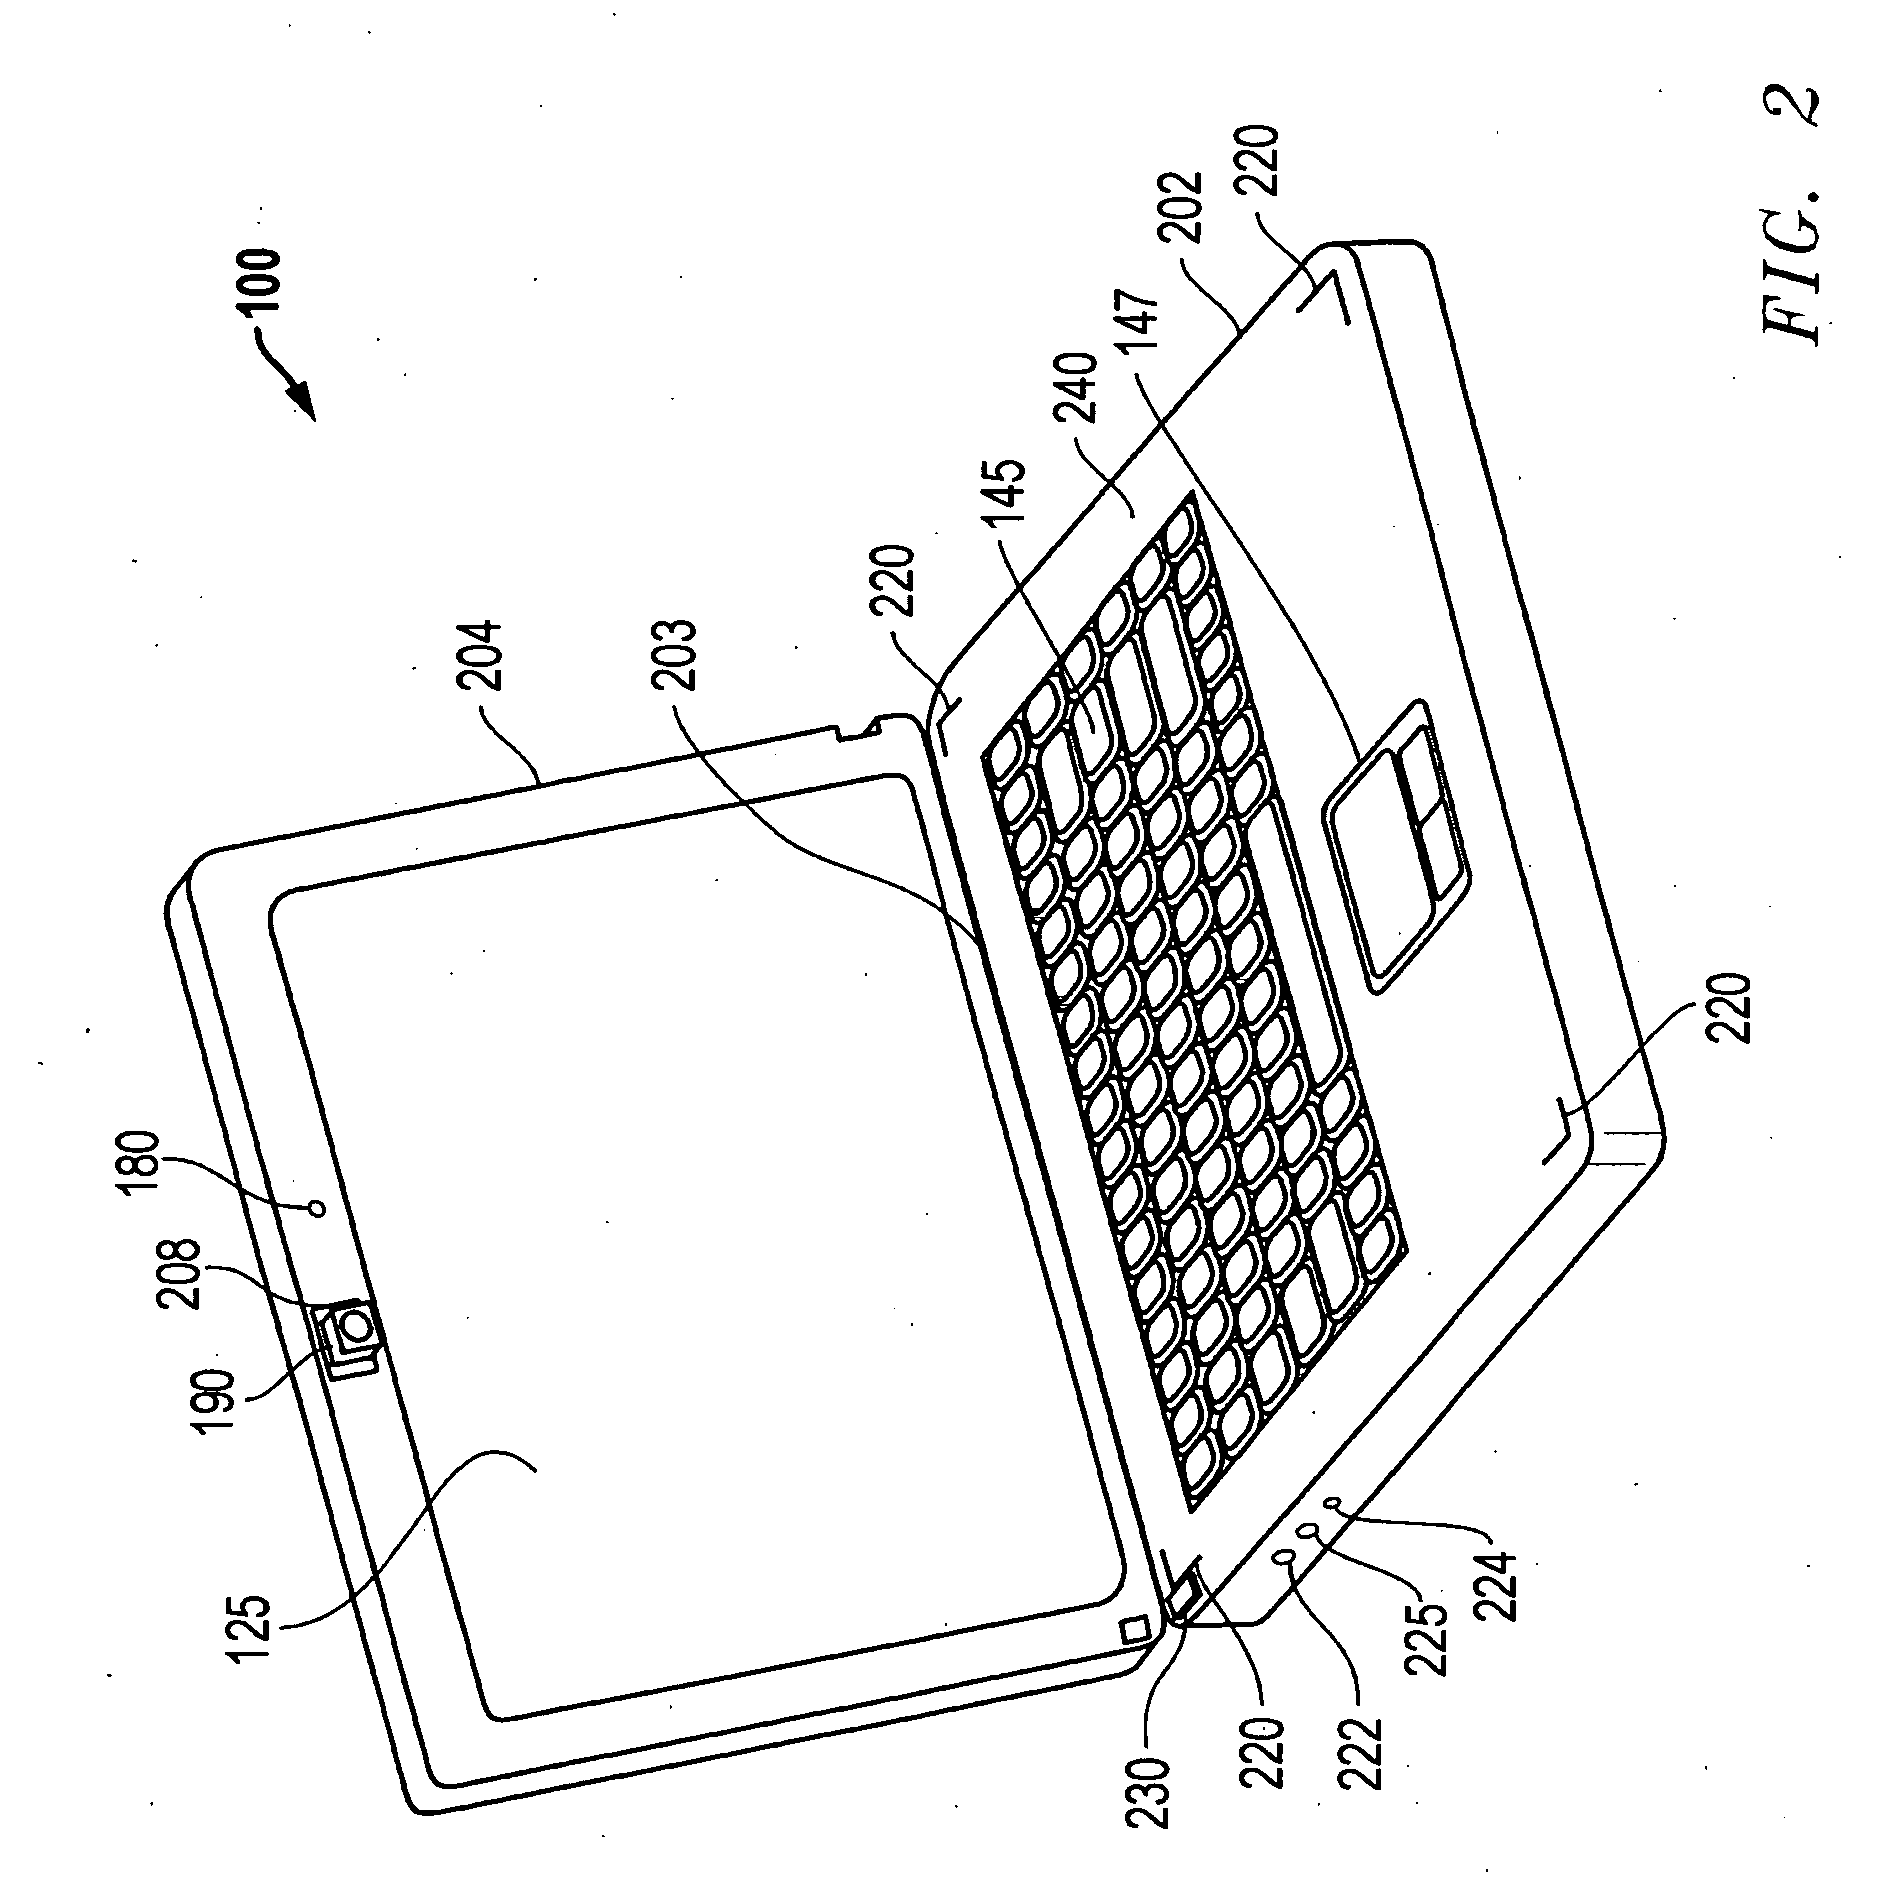 Systems and methods for document scanning using a variable intensity display of an information handling system